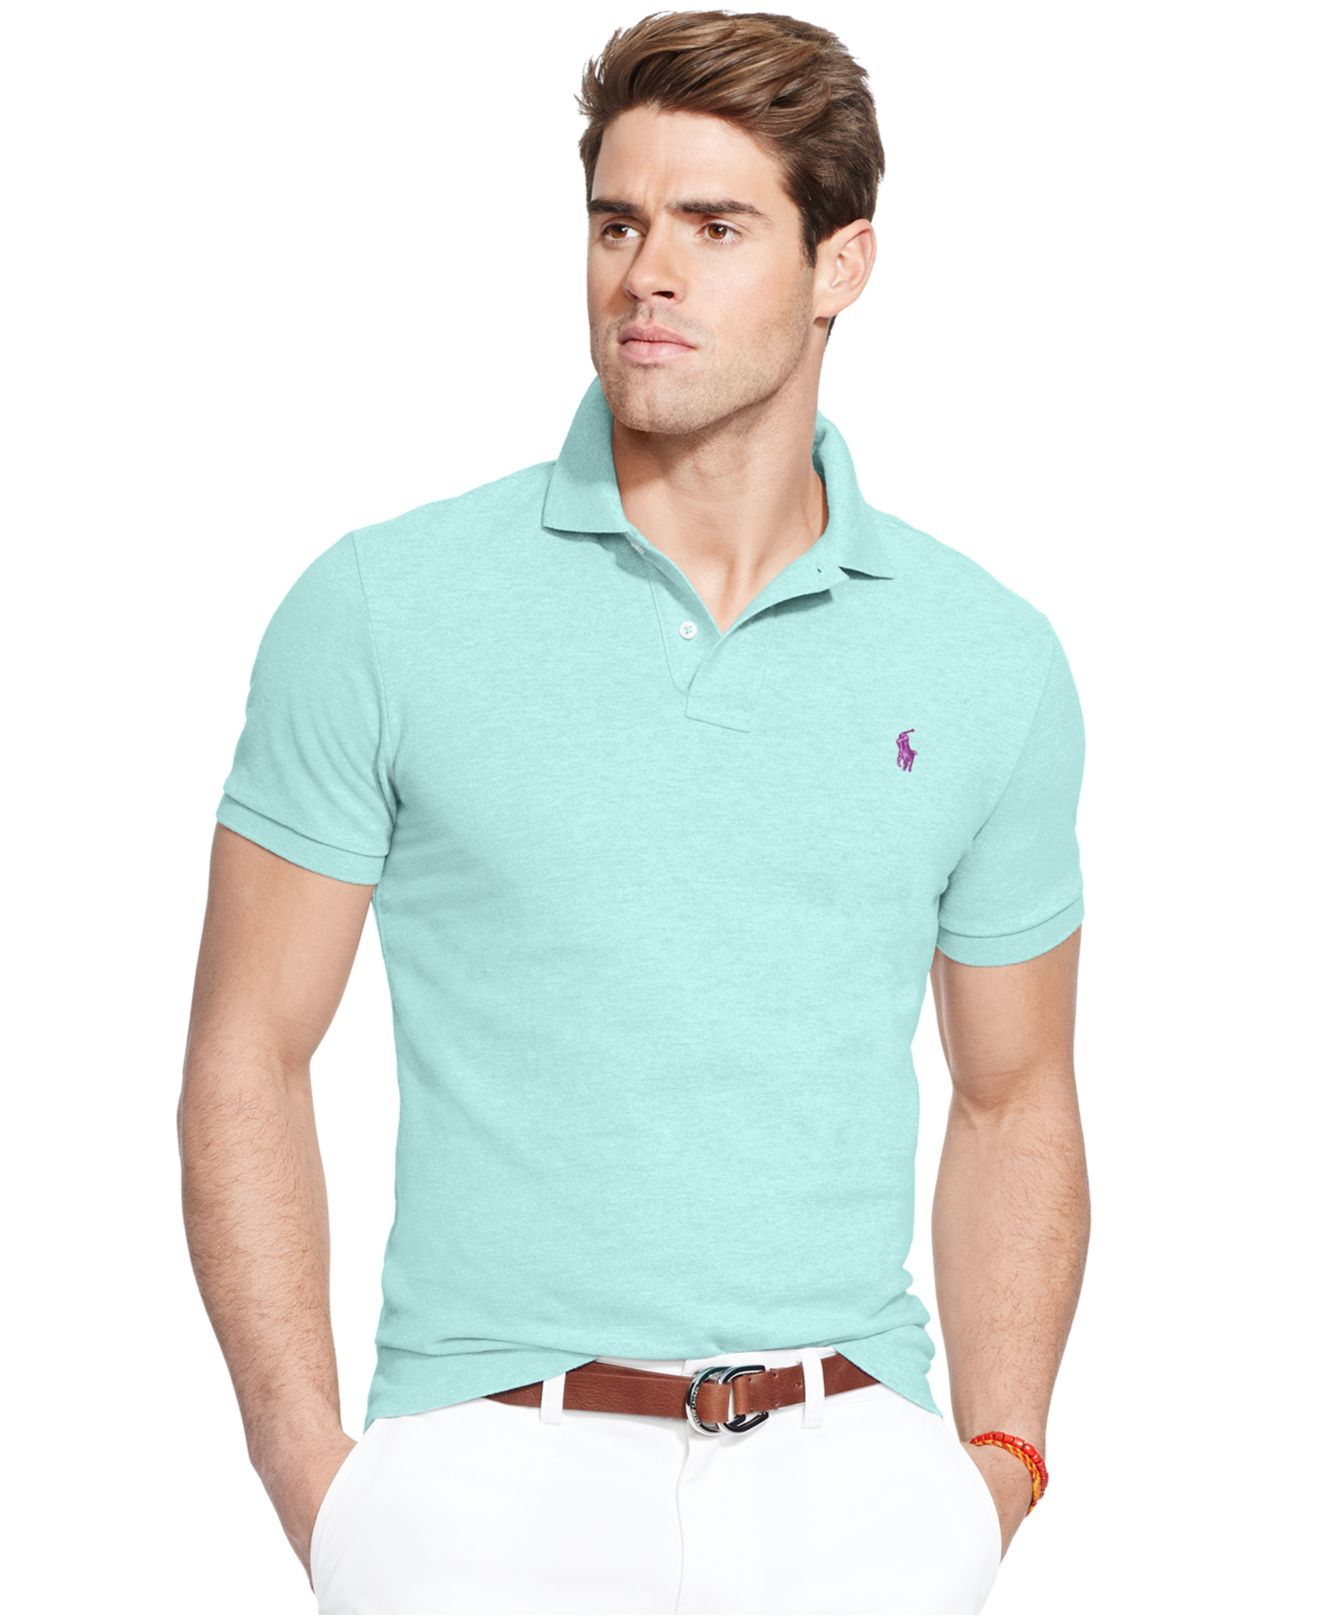 Polo Ralph Lauren Classic-fit Mesh Polo in Blue for Men - Lyst